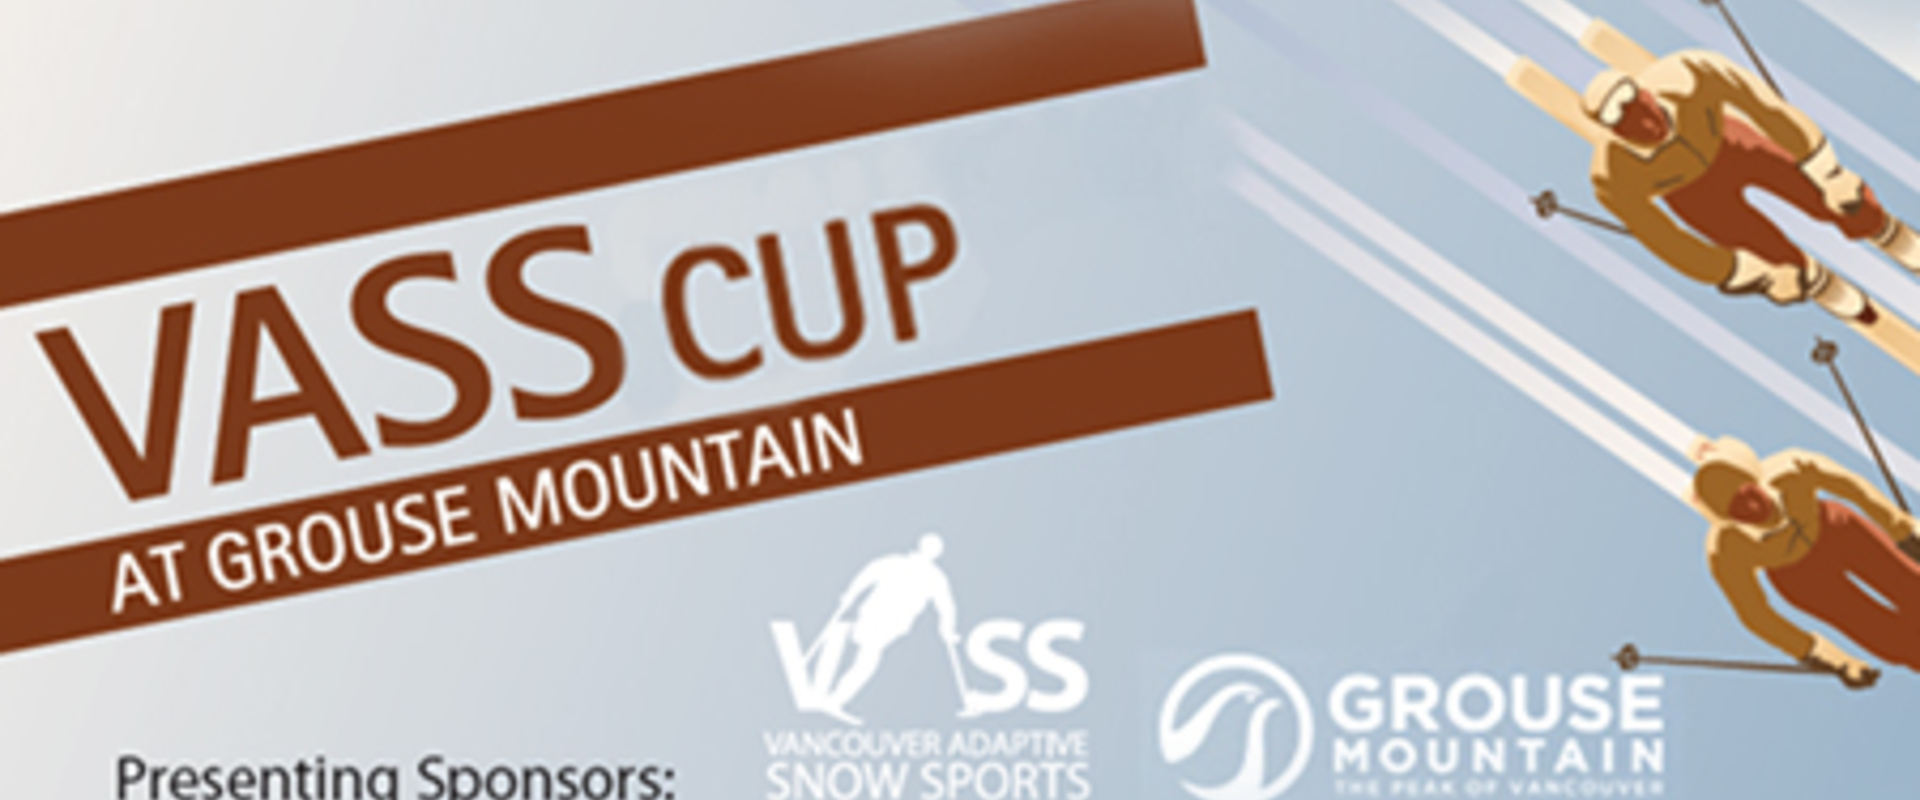 vass cup event